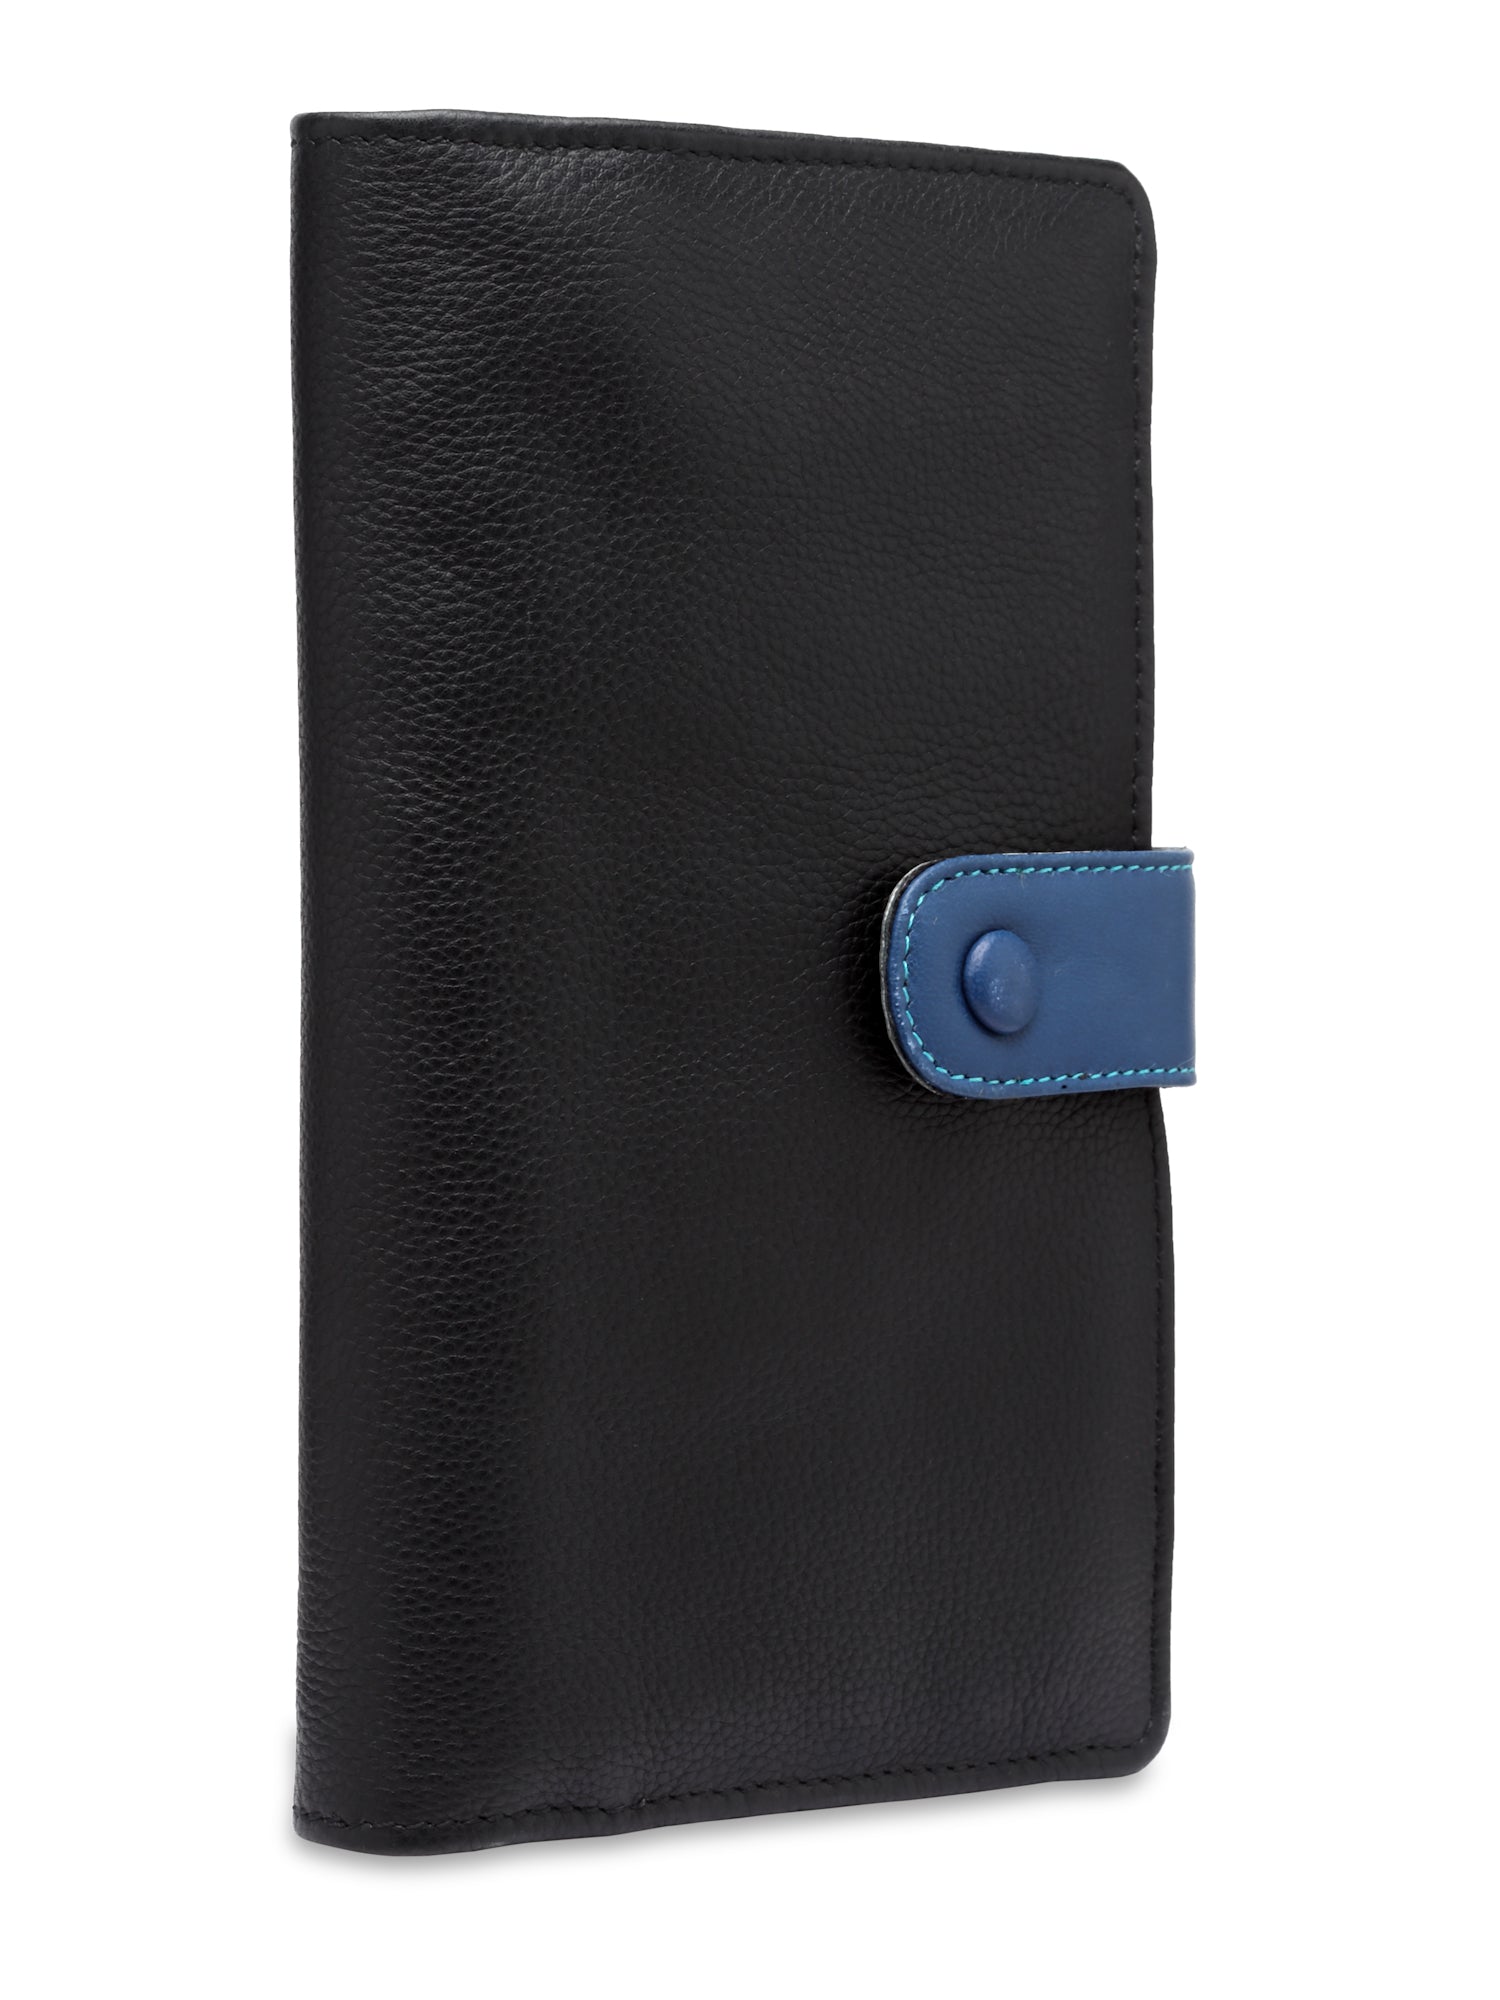 Classic travel Wallet with Luggage Tag